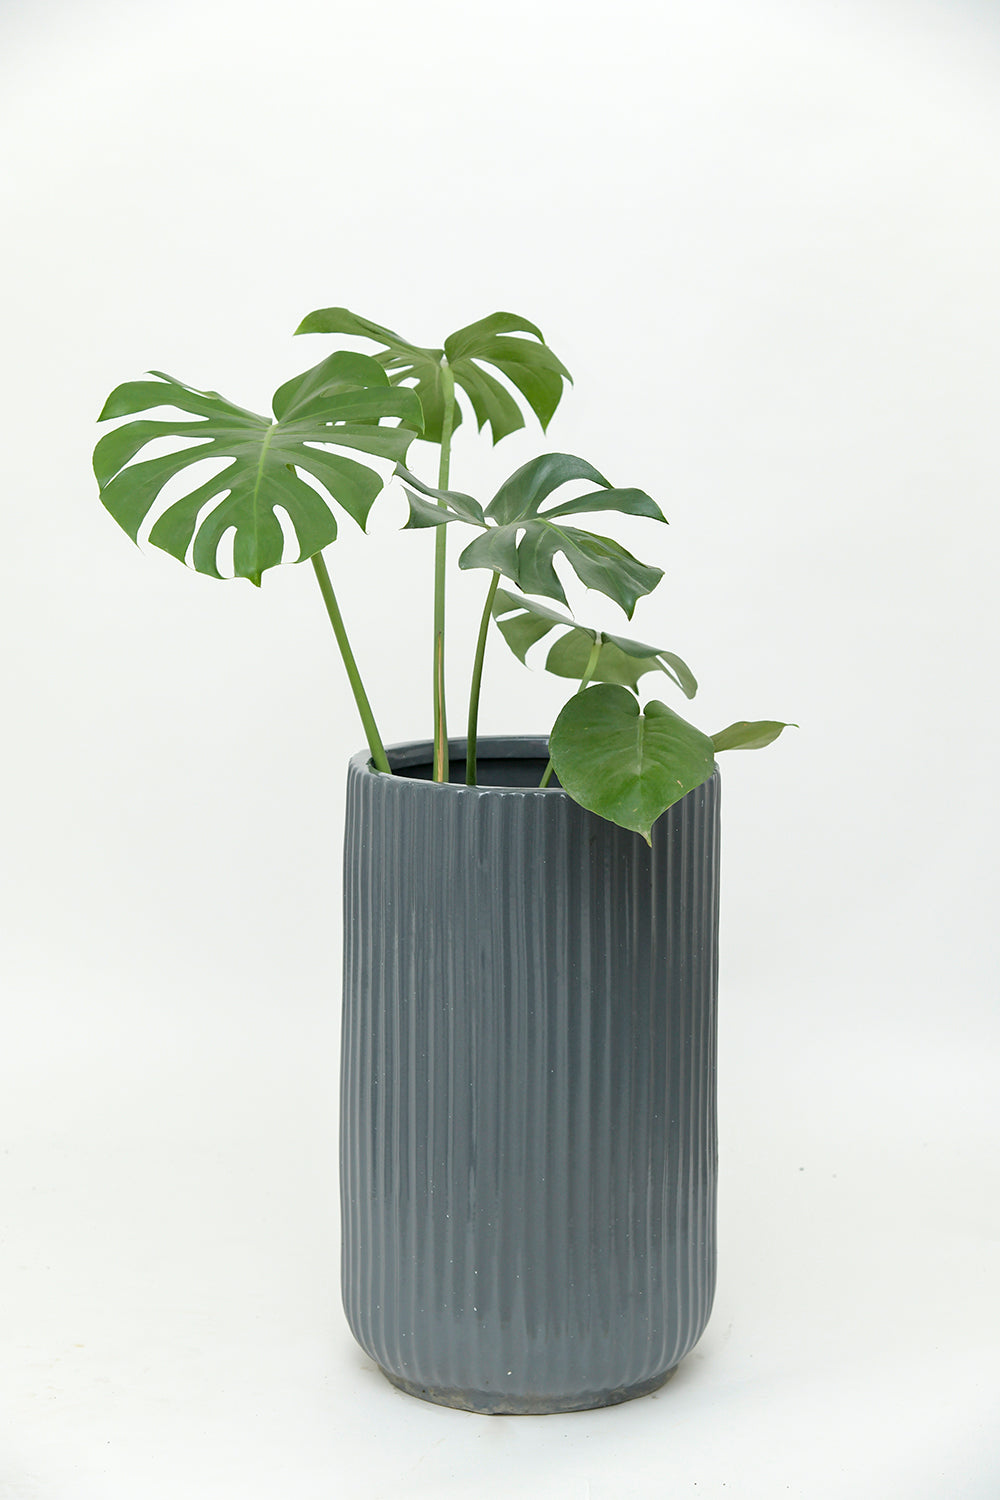 Tall size Pheonix ceramic planter in Grey color with Monstera plant in it.